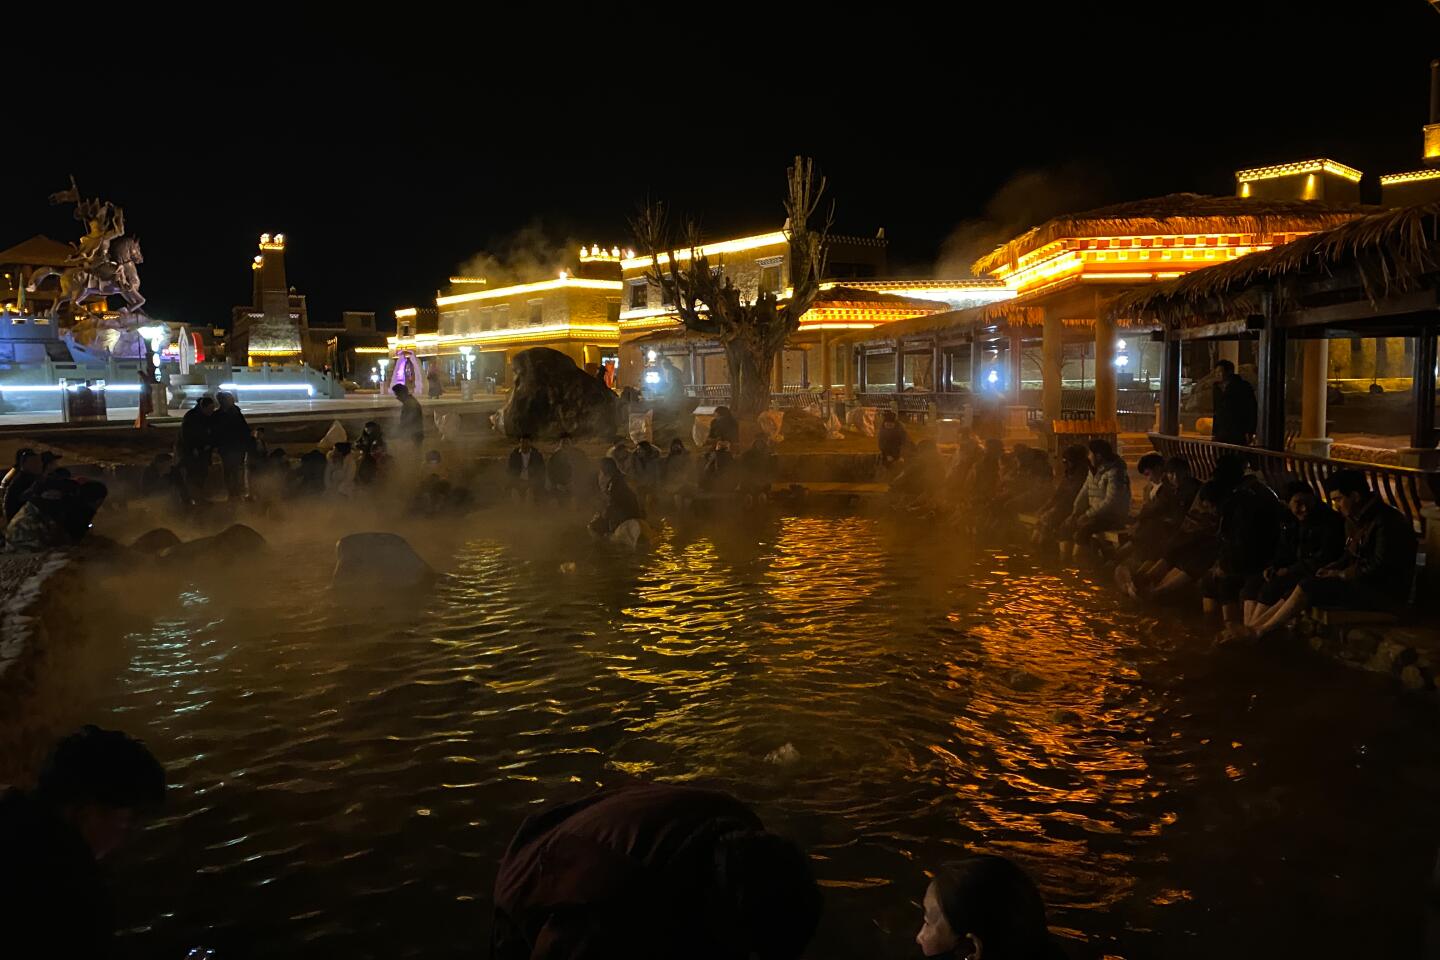 Local people gather around a hot spring, dipping their feet in together in Garze city on Jan. 19, 2020.